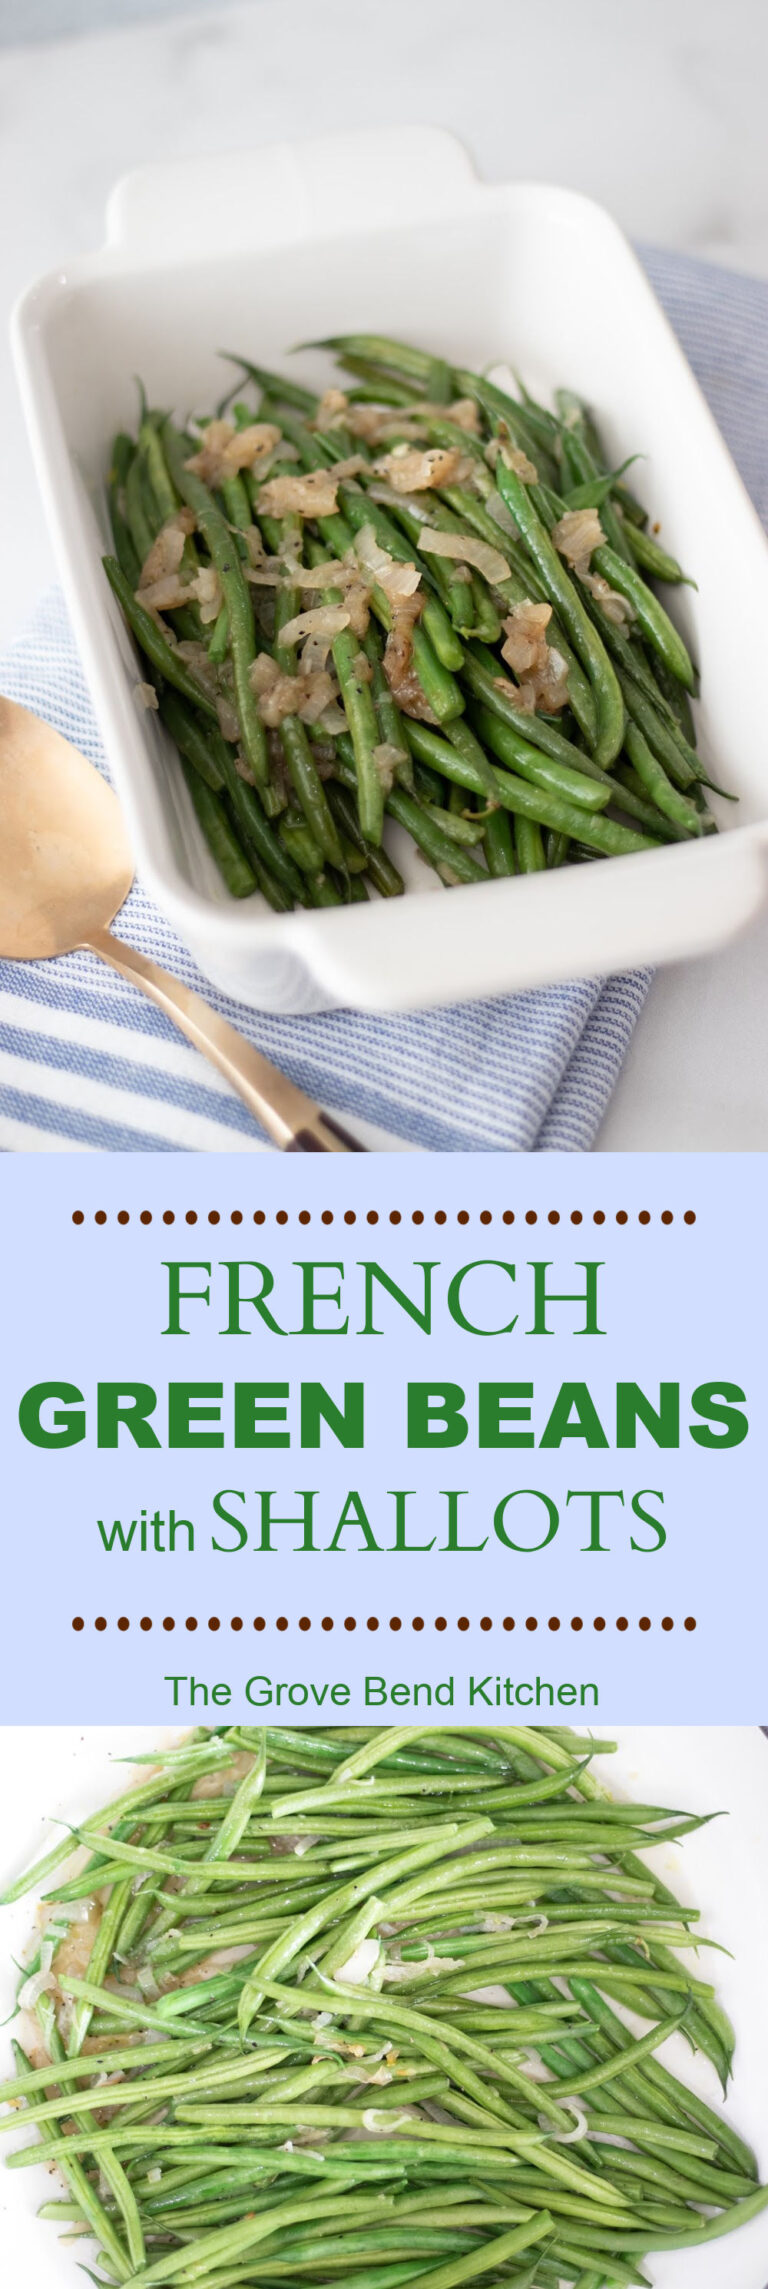 French Green Beans With Shallots 1 768x2289 